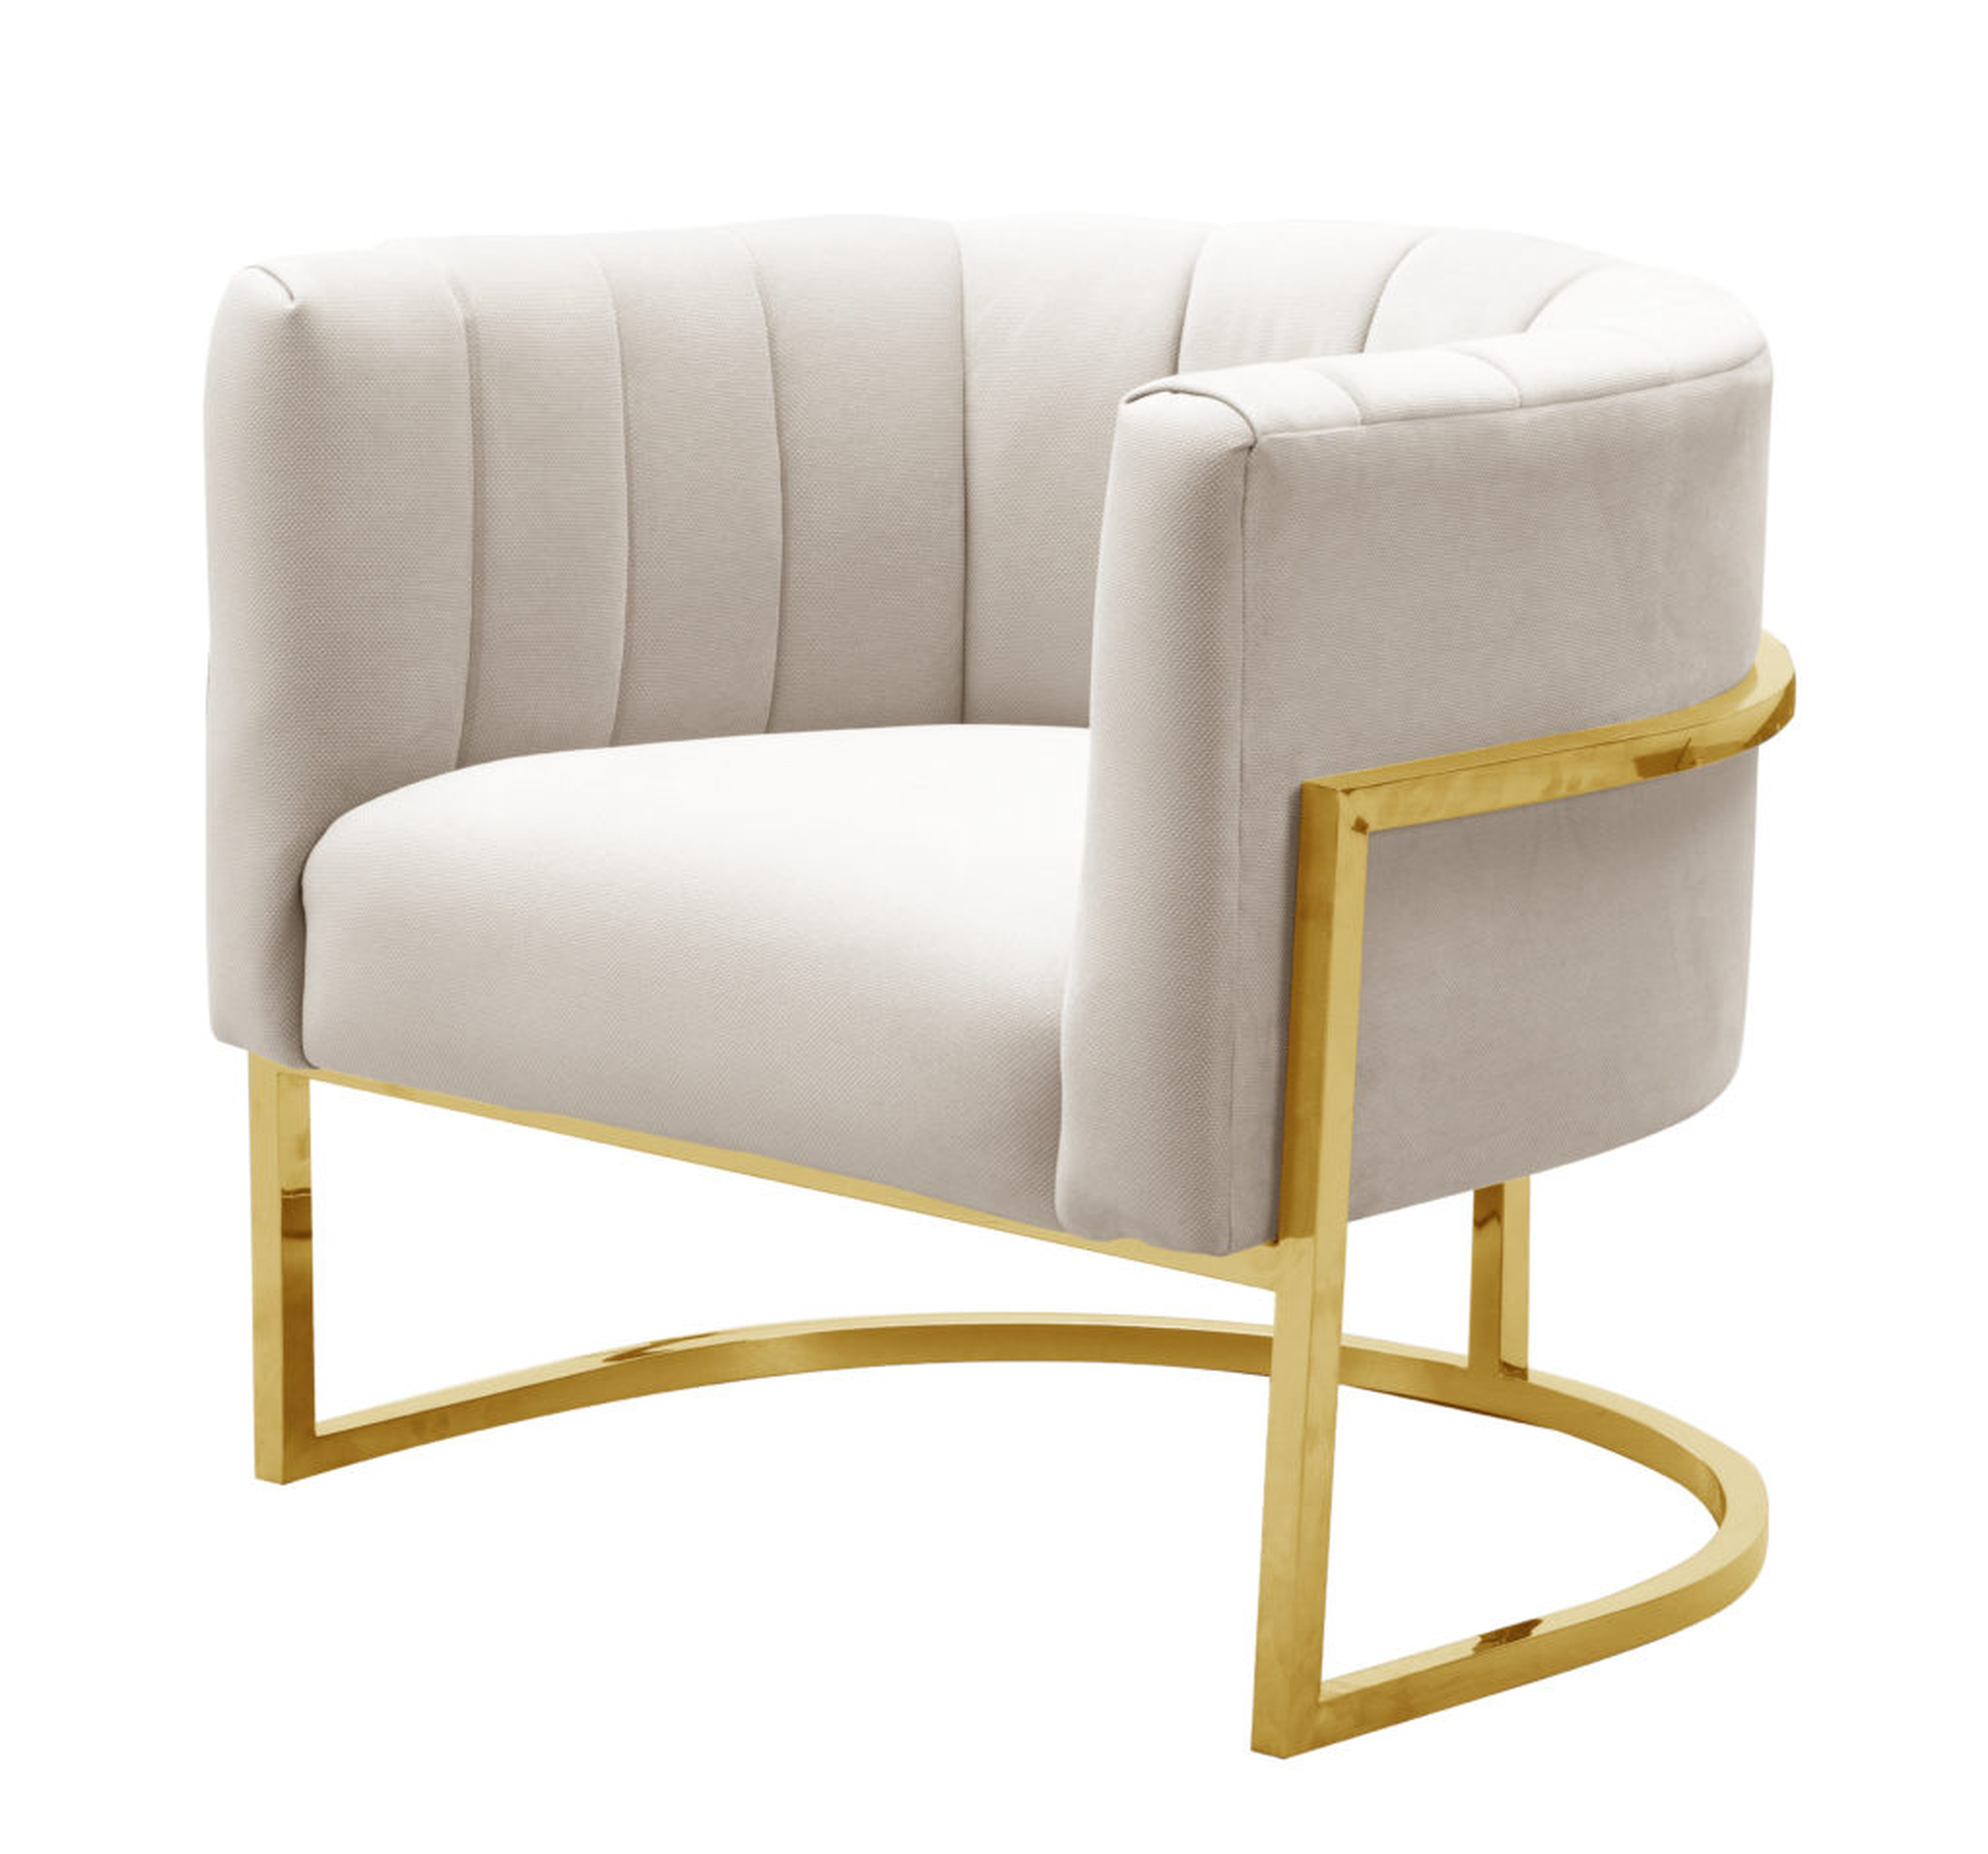 Magnolia Spotted Cream Chair with Gold - Maren Home